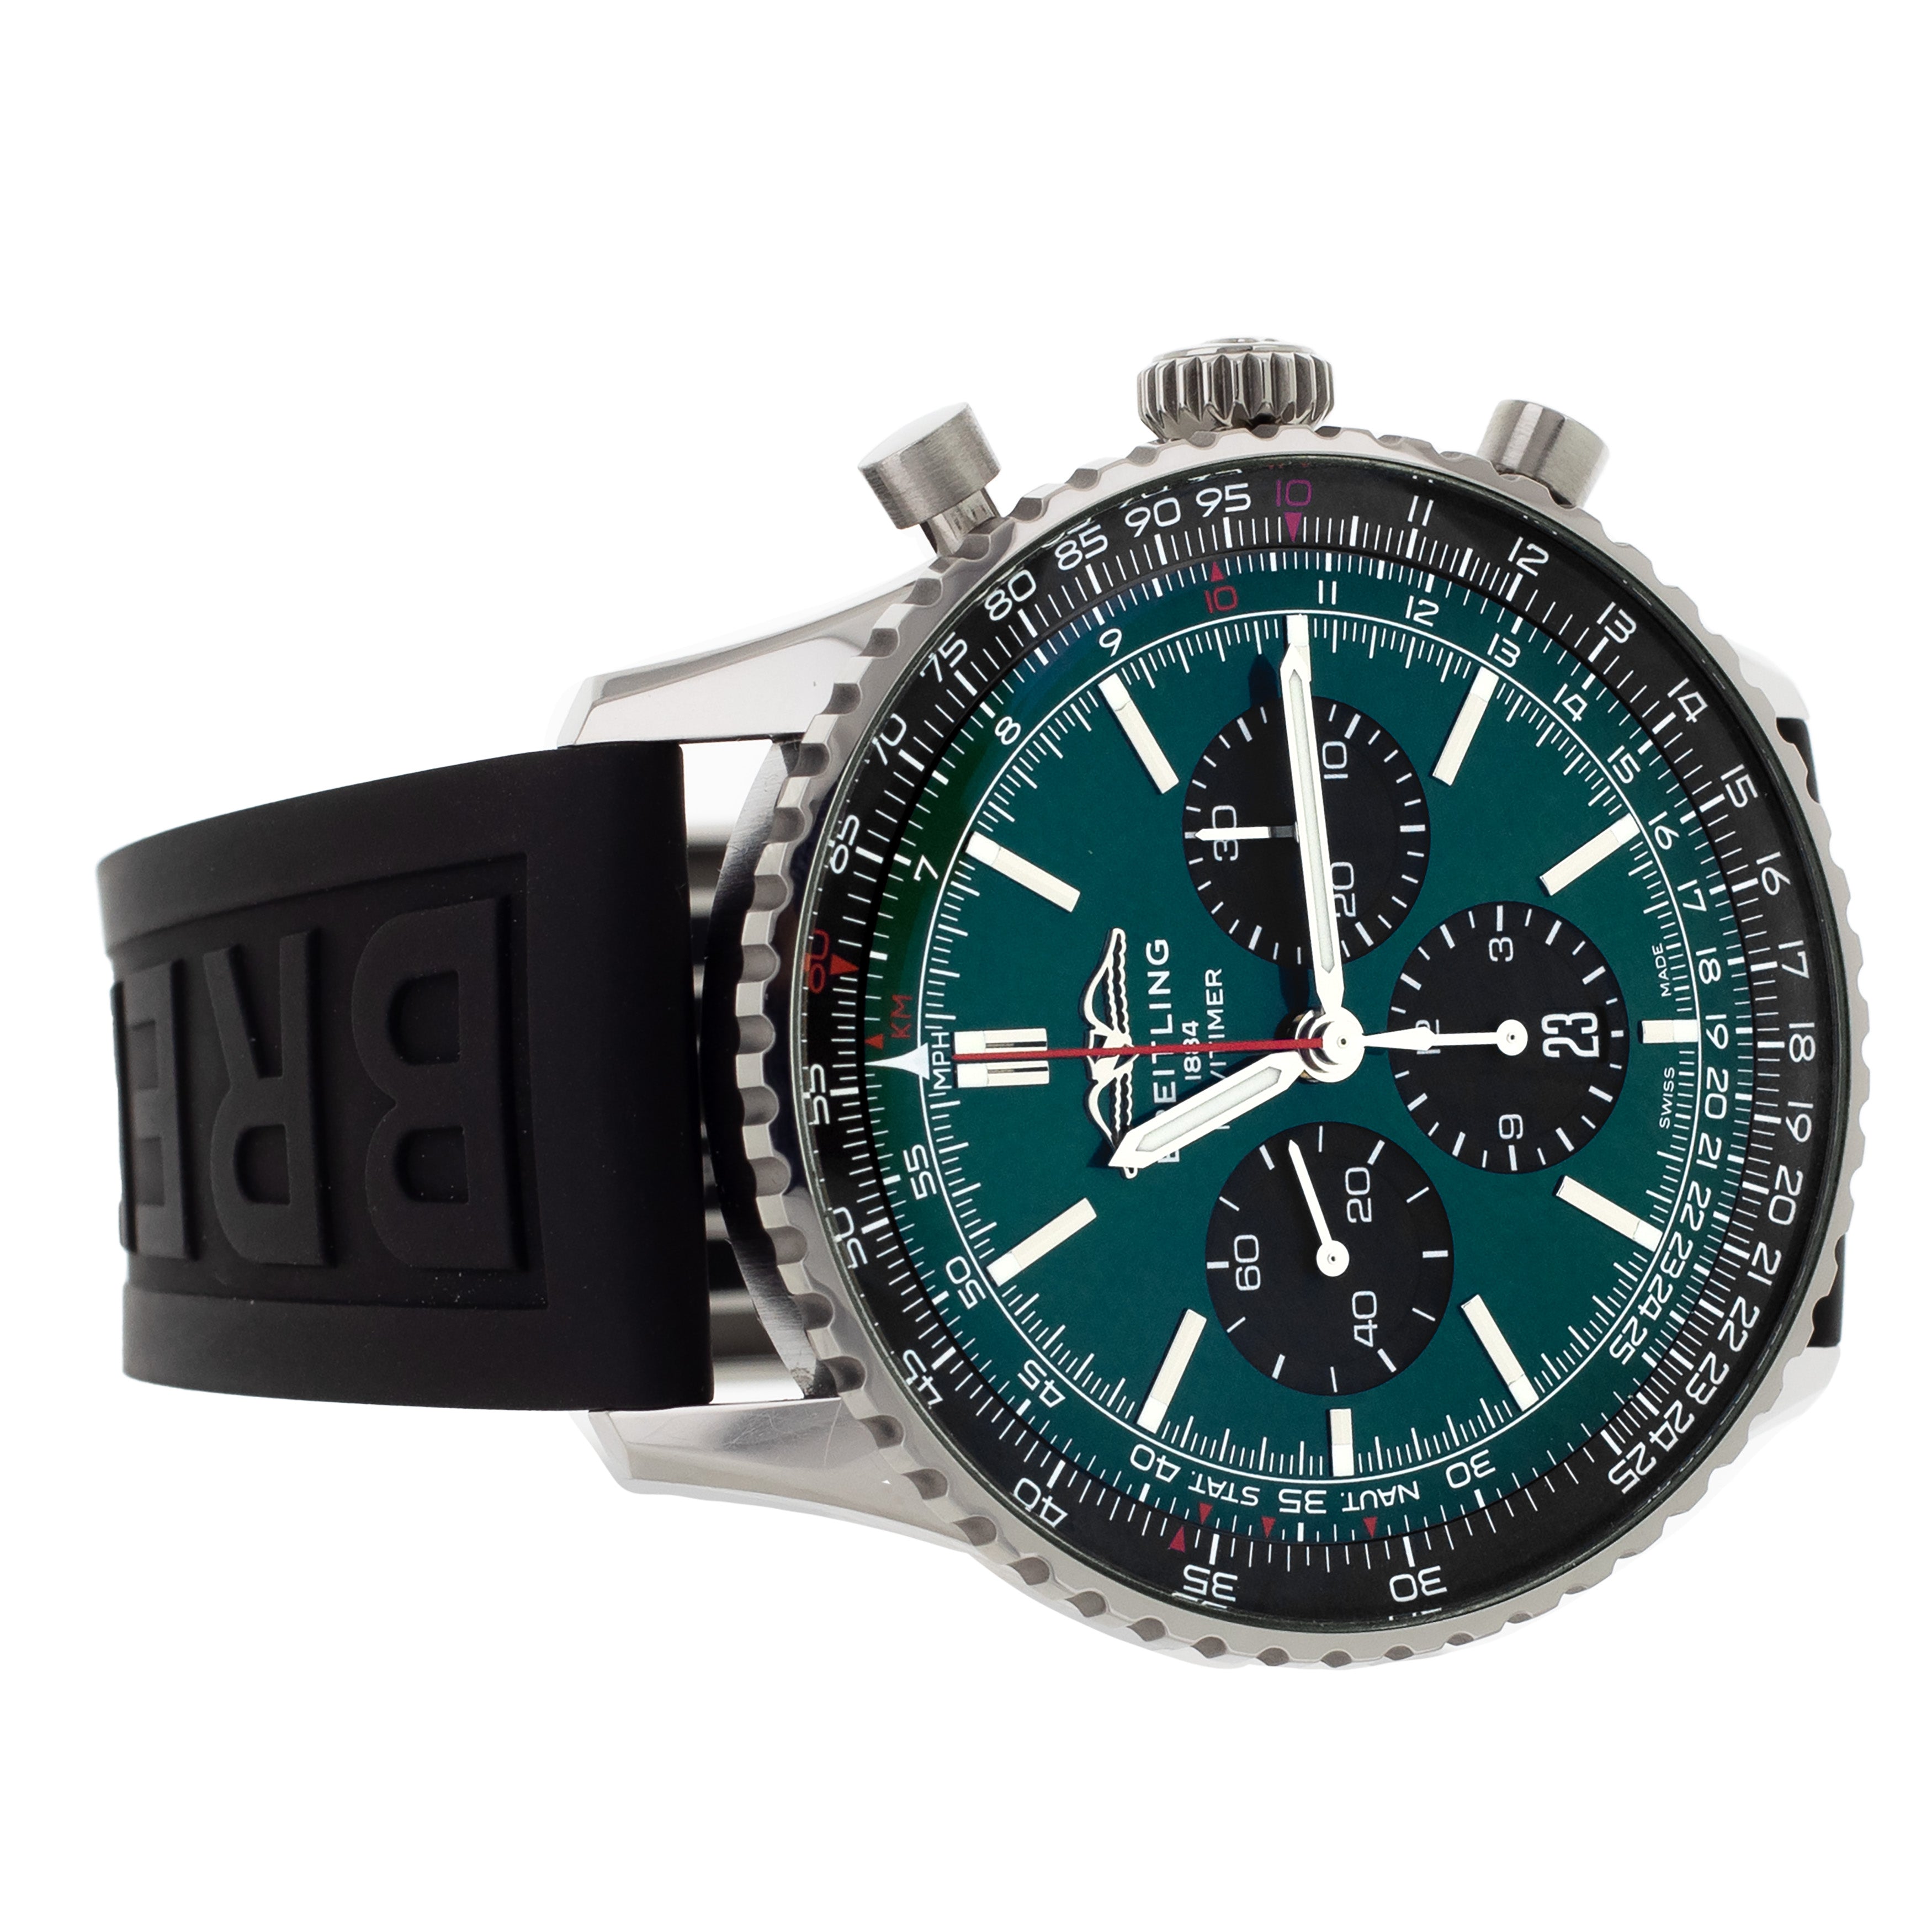 Breitling Navitimer B01 Chronograph Stainless Steel Green Dial 46mm AB0137241L1P1